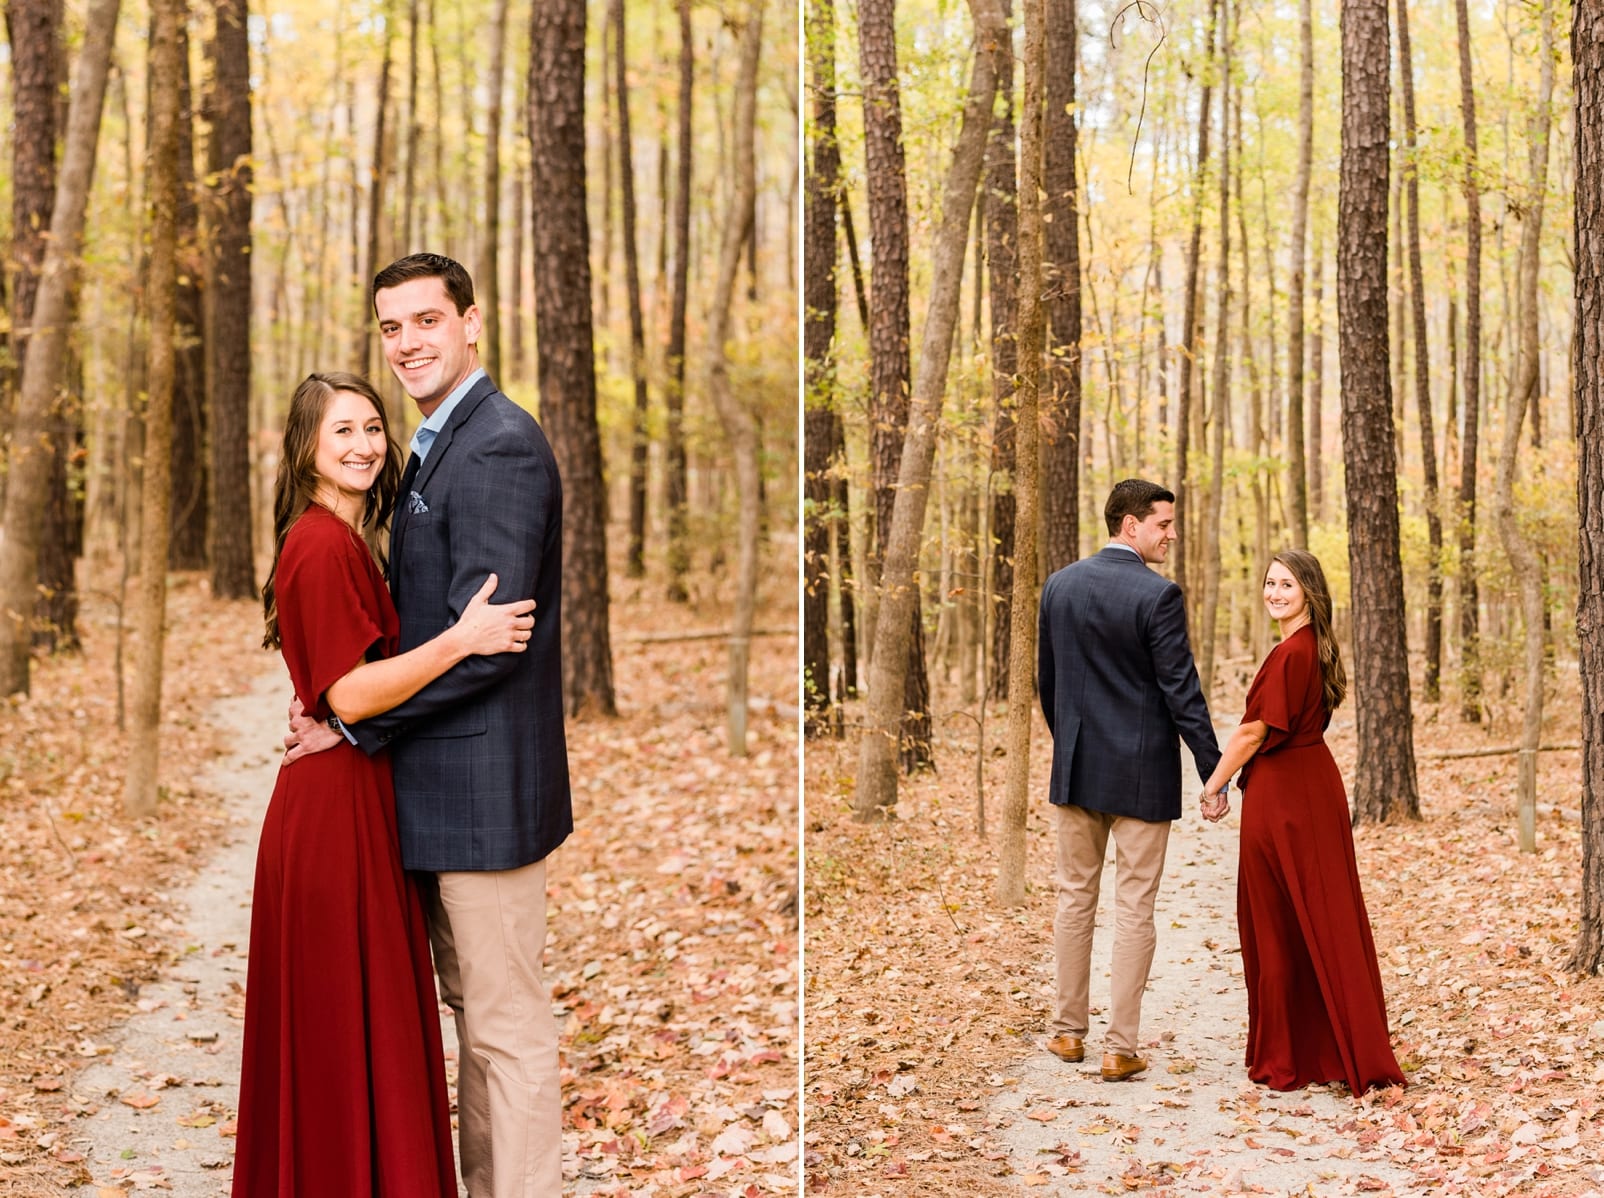 Raleigh couple engagement session in the woods in a long red dress and a dark suit jacket photo